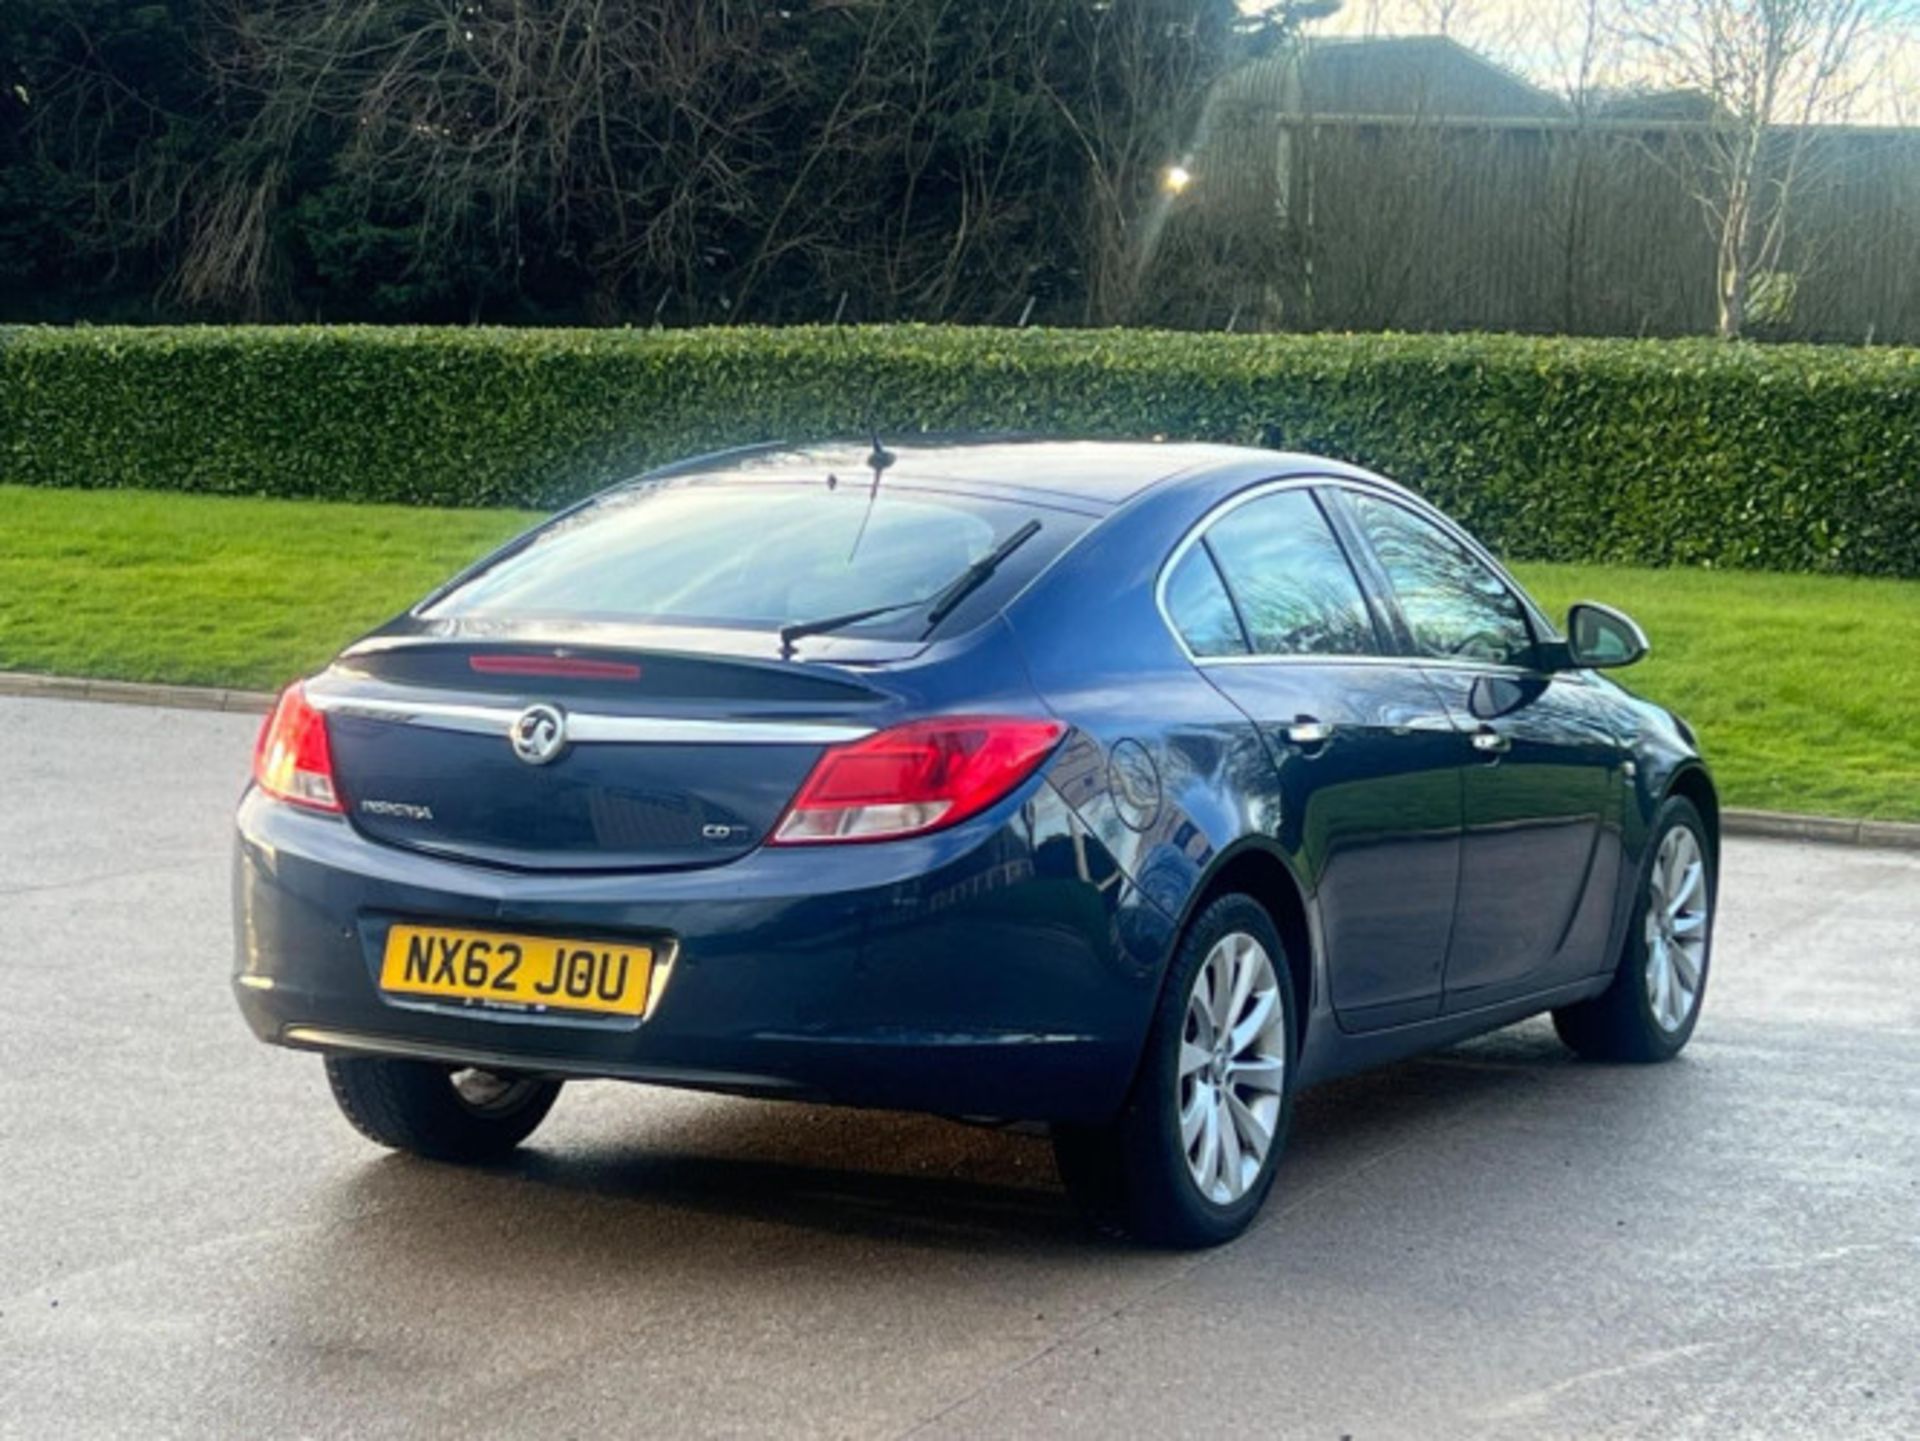 2012 VAUXHALL INSIGNIA 2.0 CDTI ELITE AUTO EURO 5 - DISCOVER EXCELLENCE >>--NO VAT ON HAMMER--<< - Image 112 of 120